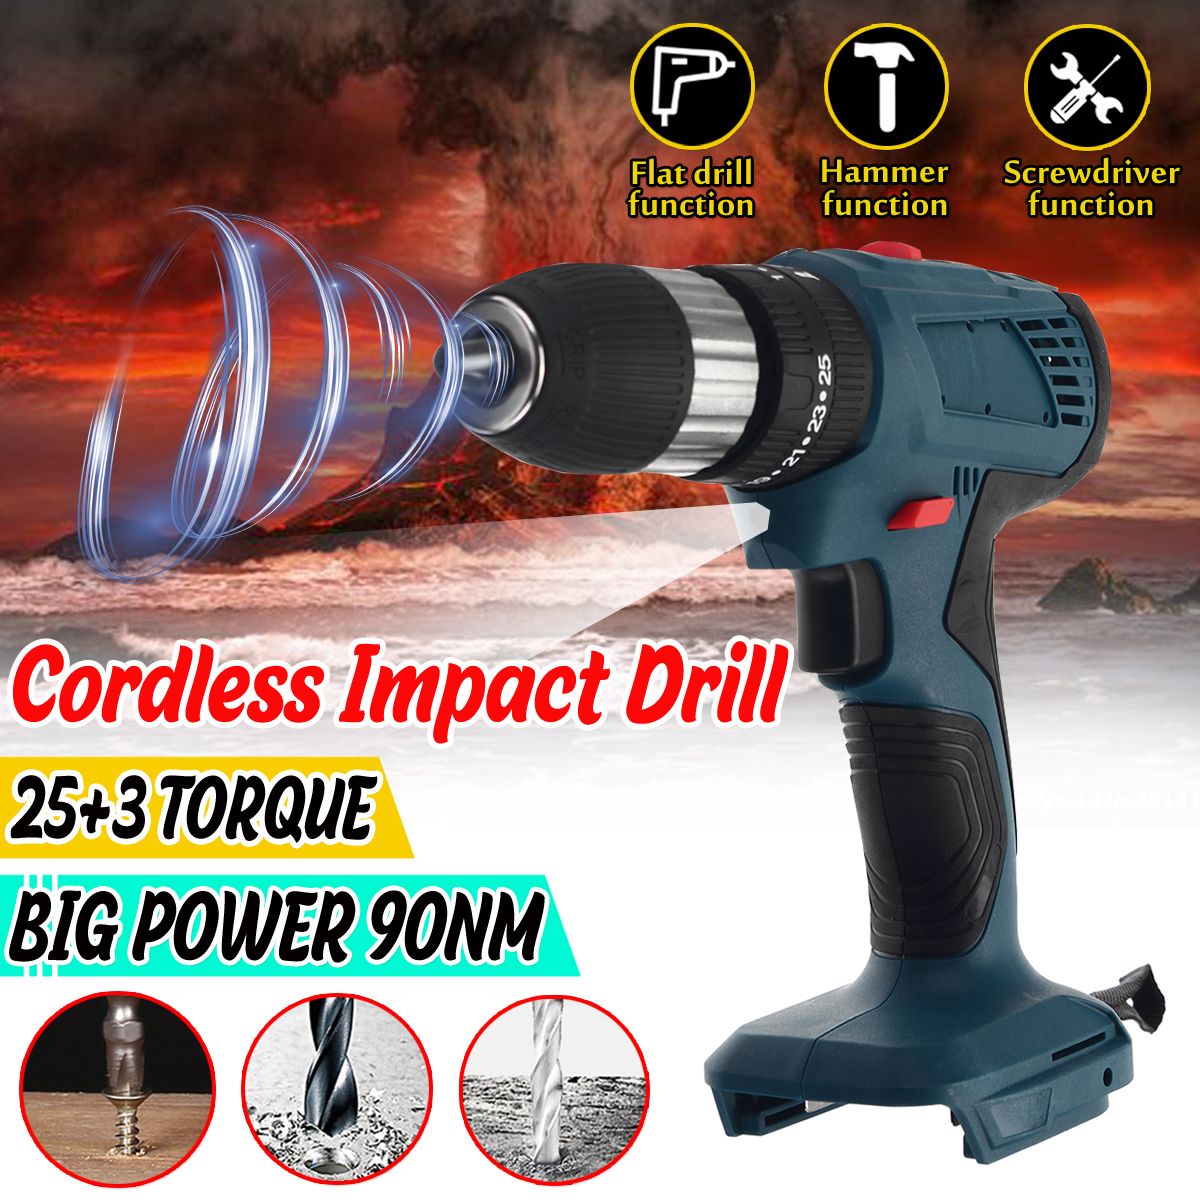 13mm-2-Speed-3-In-1-Cordless-Electric-Drill-Driver-Impact-Hammer-Drill-Screwdriver-Adapted-To-Matita-1653658